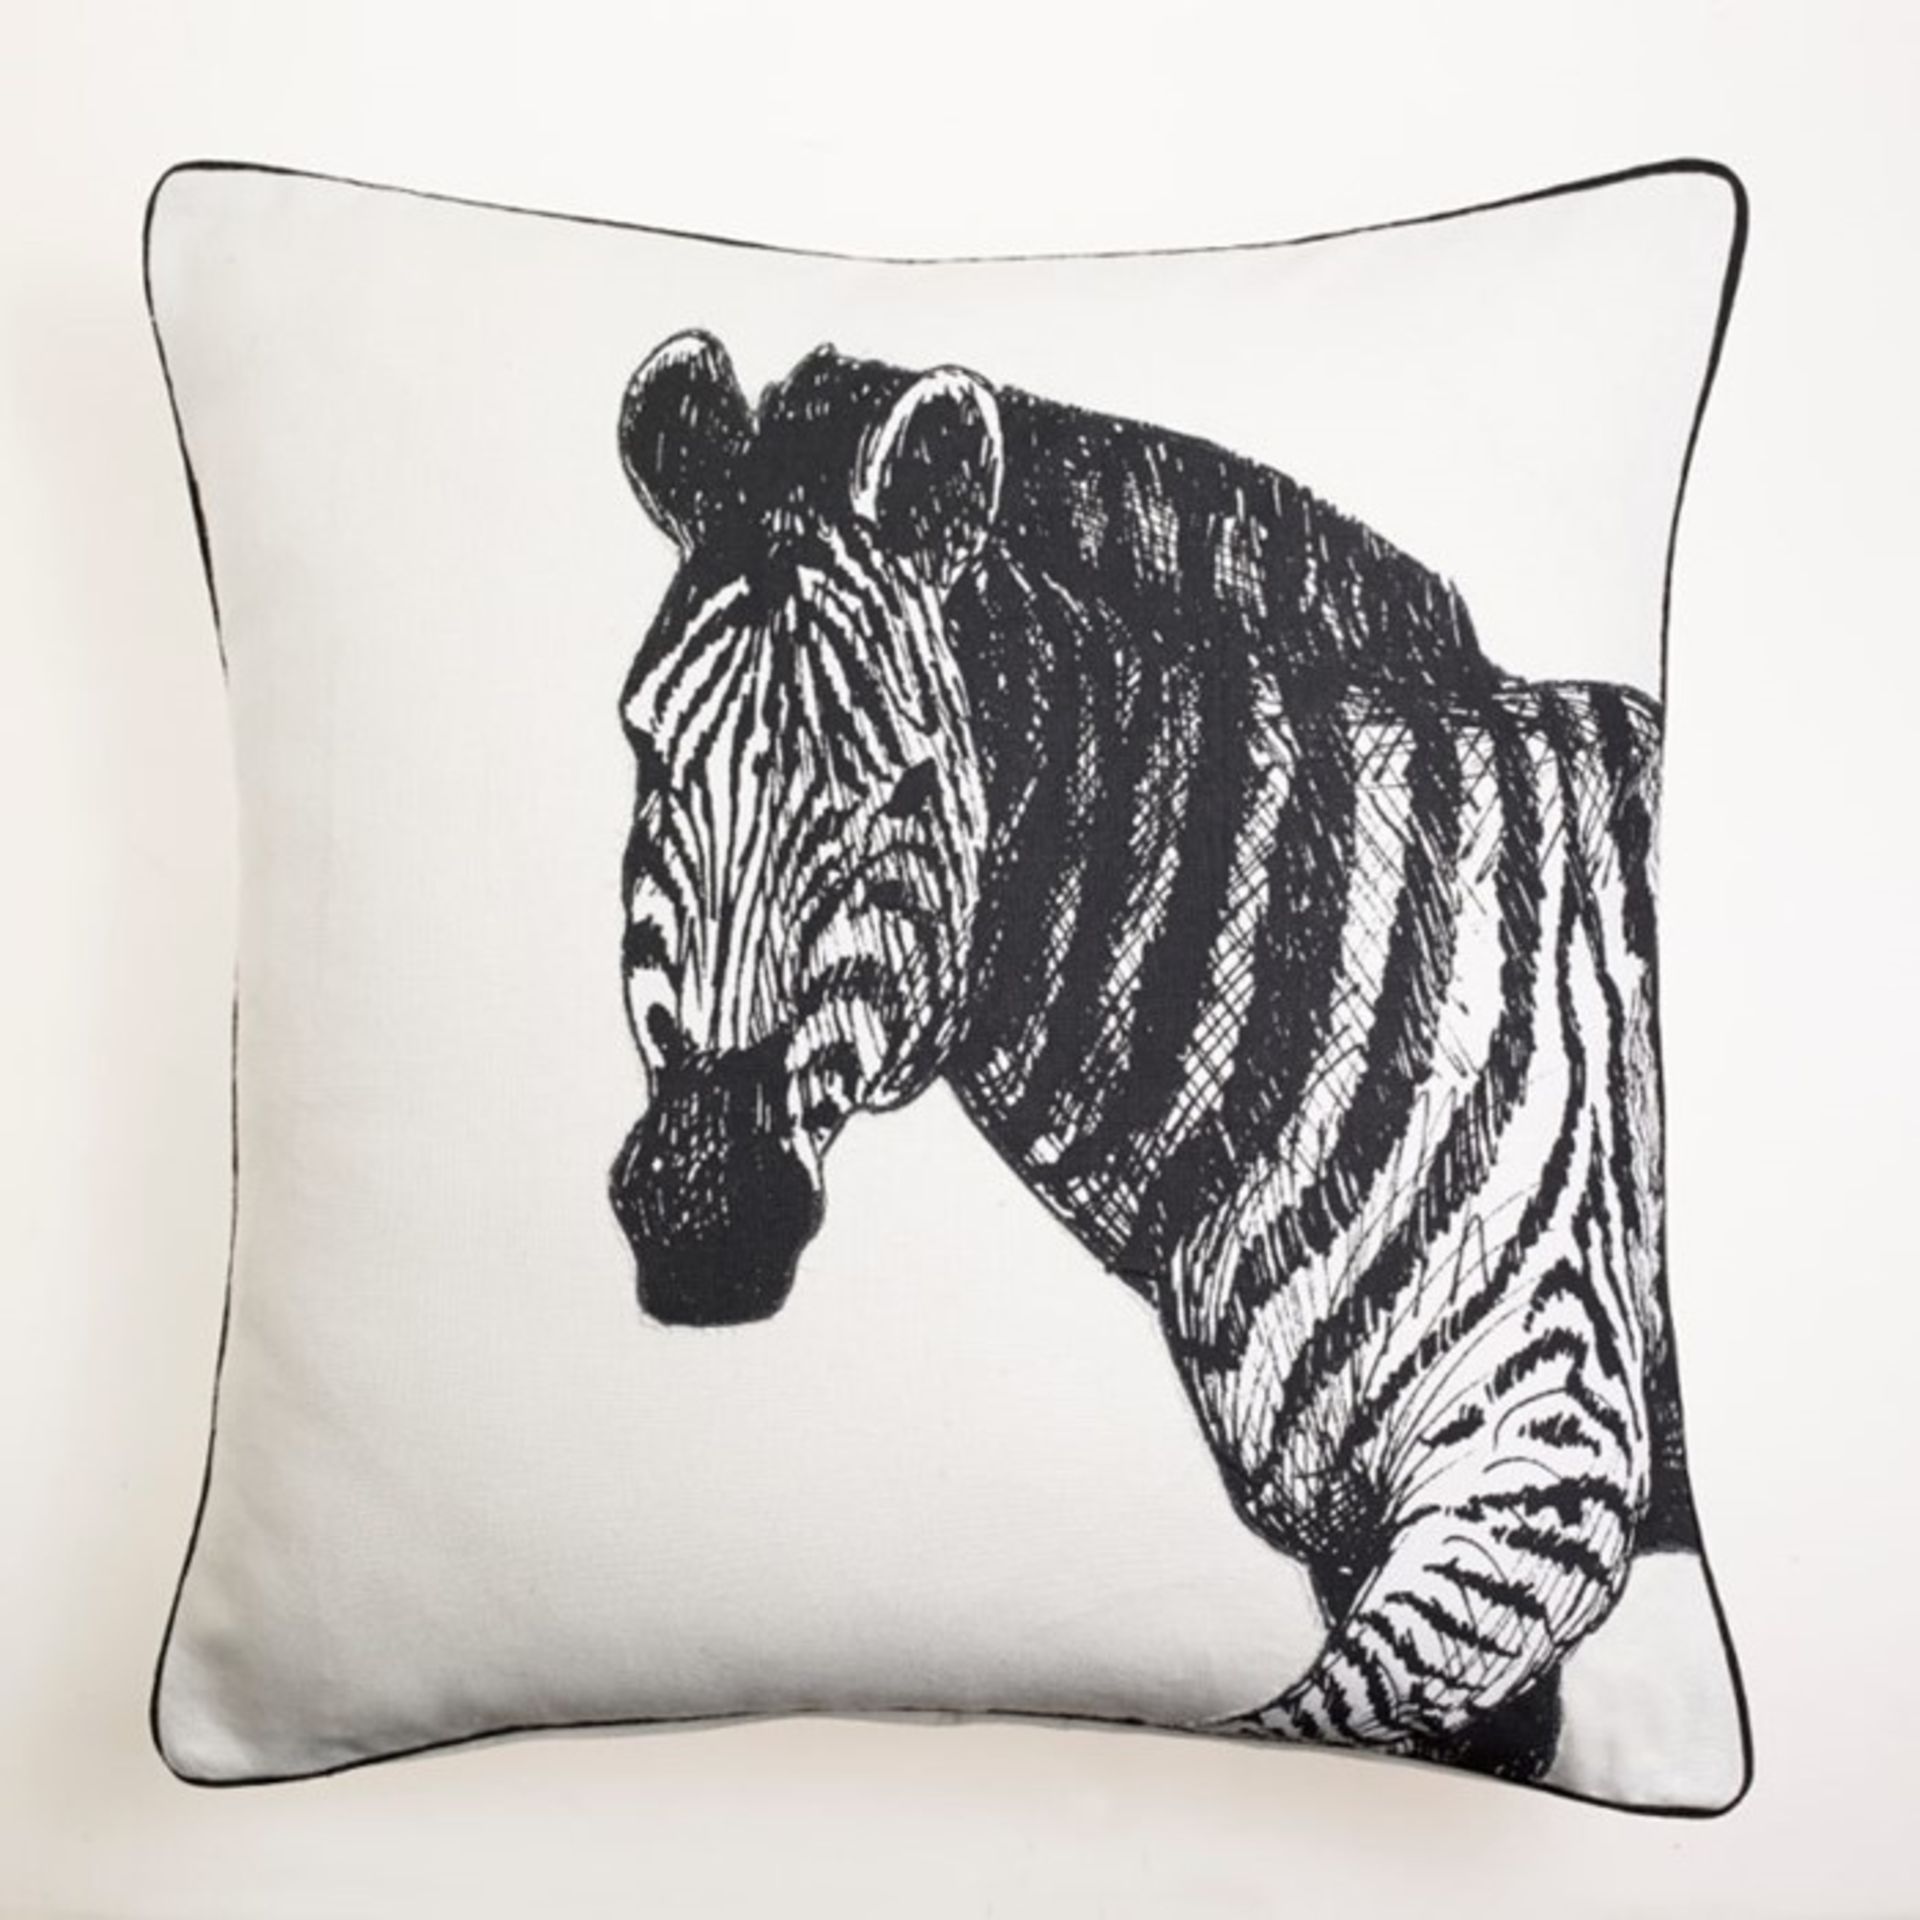 1 BRAND NEW PACKAGED ARTHOUSE ZEBRA CREAM CUSHION 300120 (VIEWING HIGHLY RECOMMENDED)